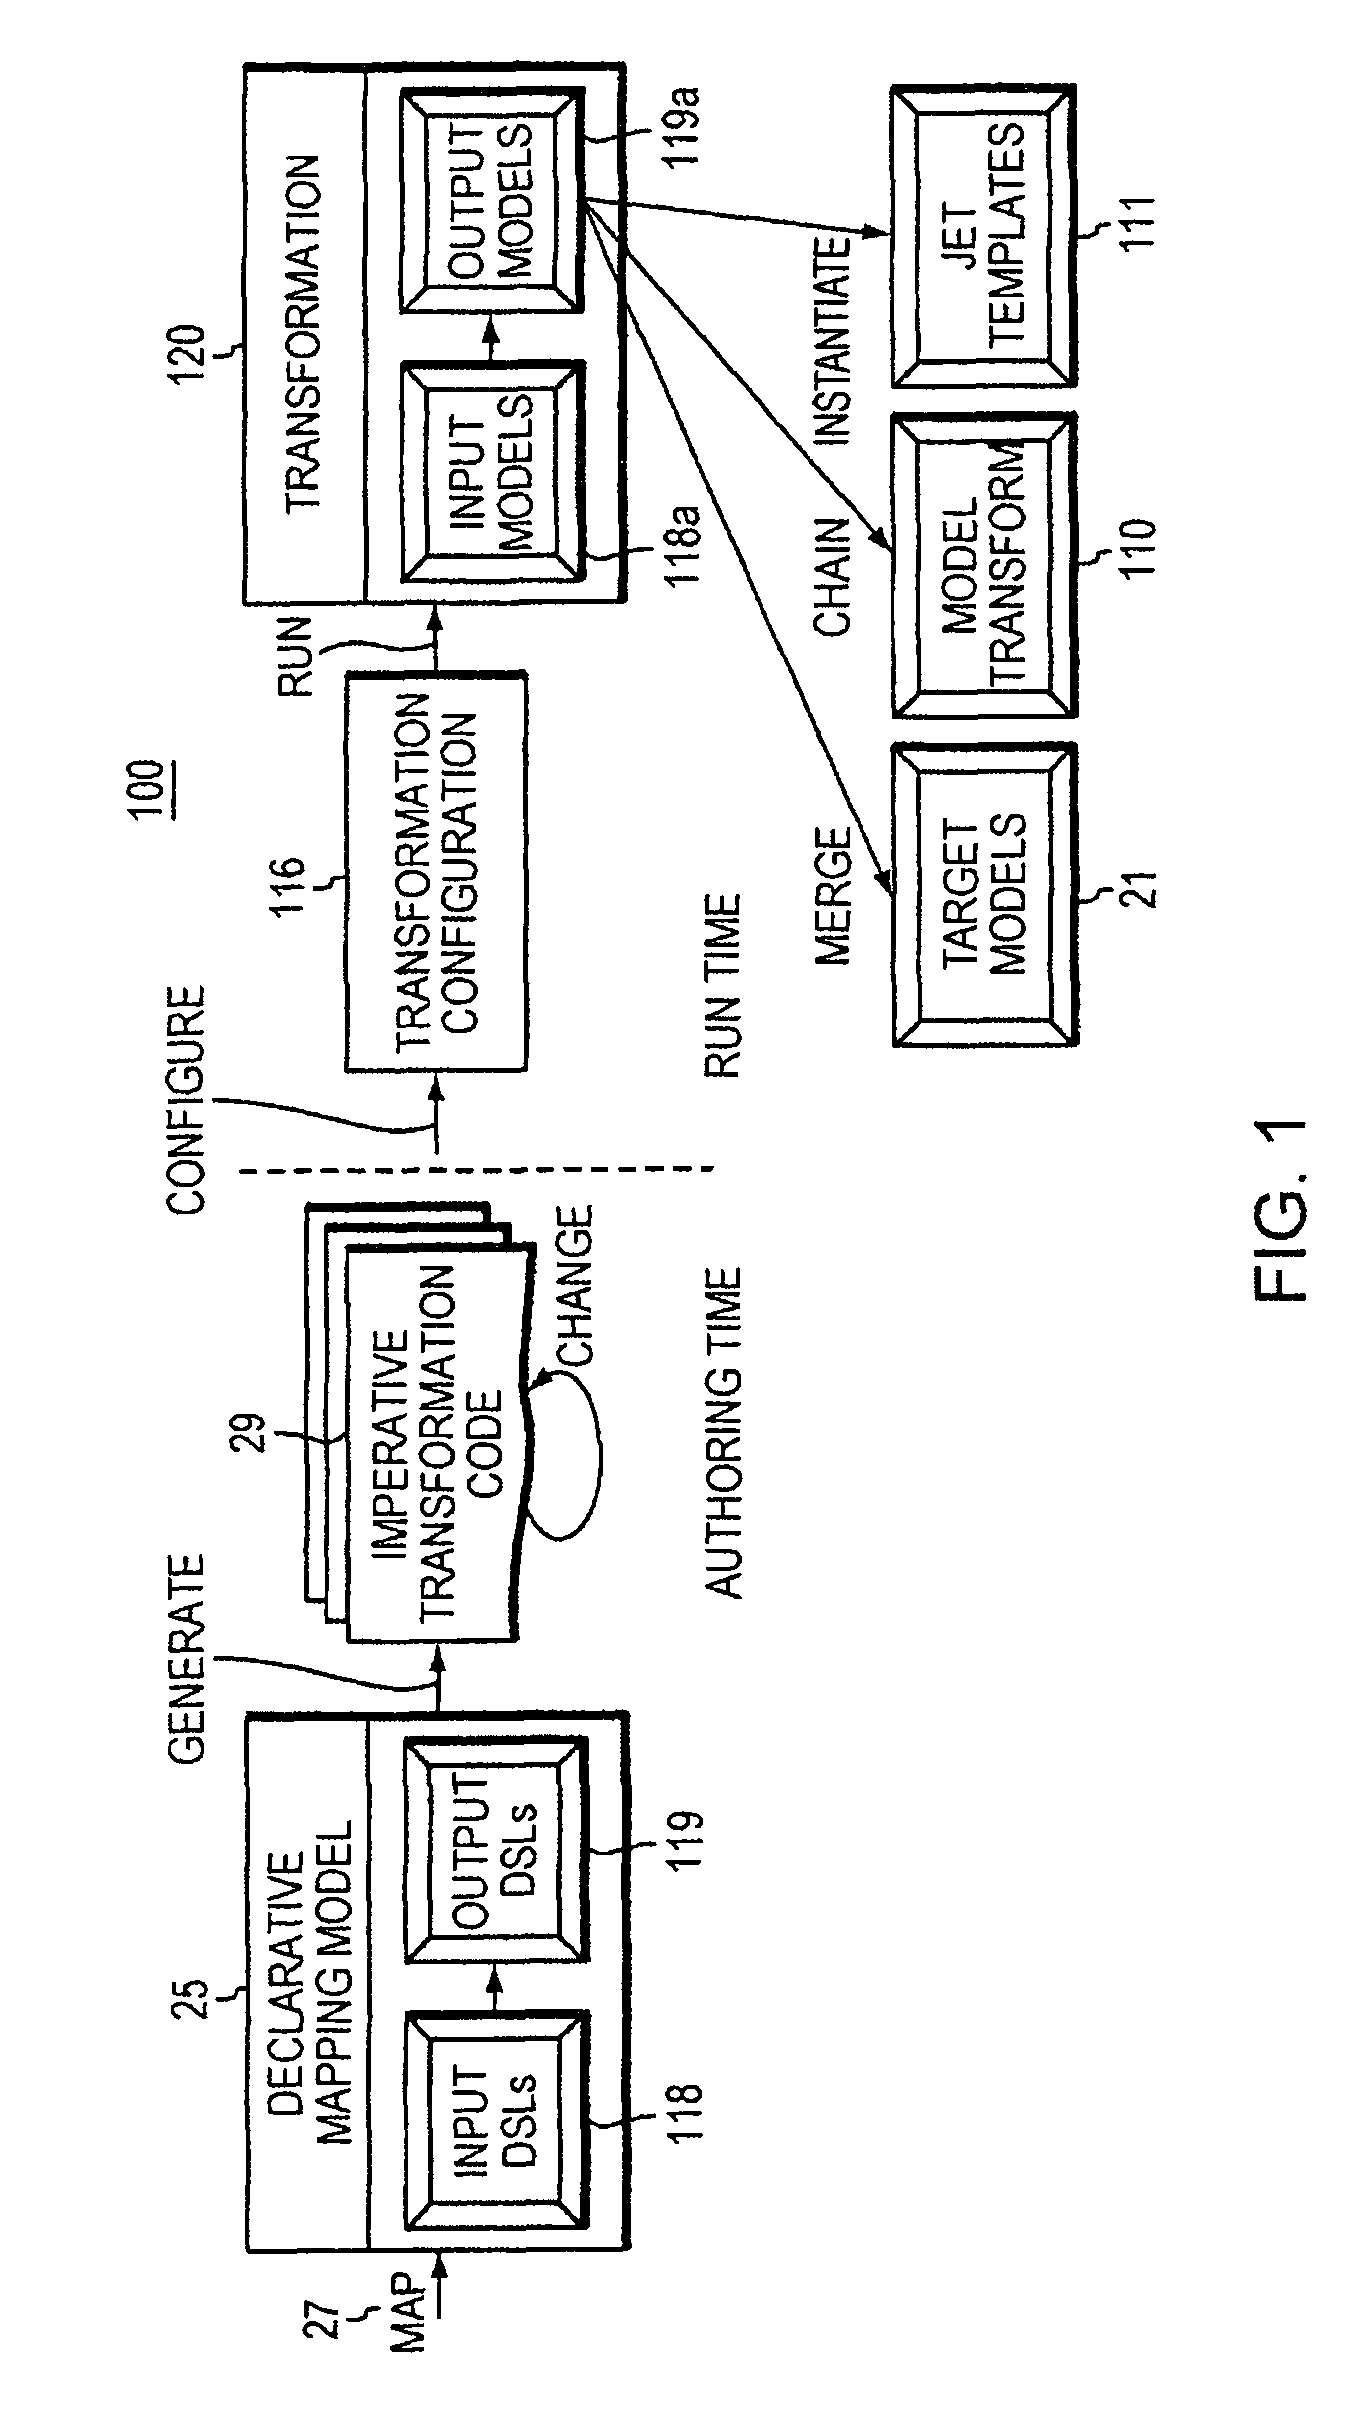 Computer method and apparatus for providing model to model transformation using an MDA approach